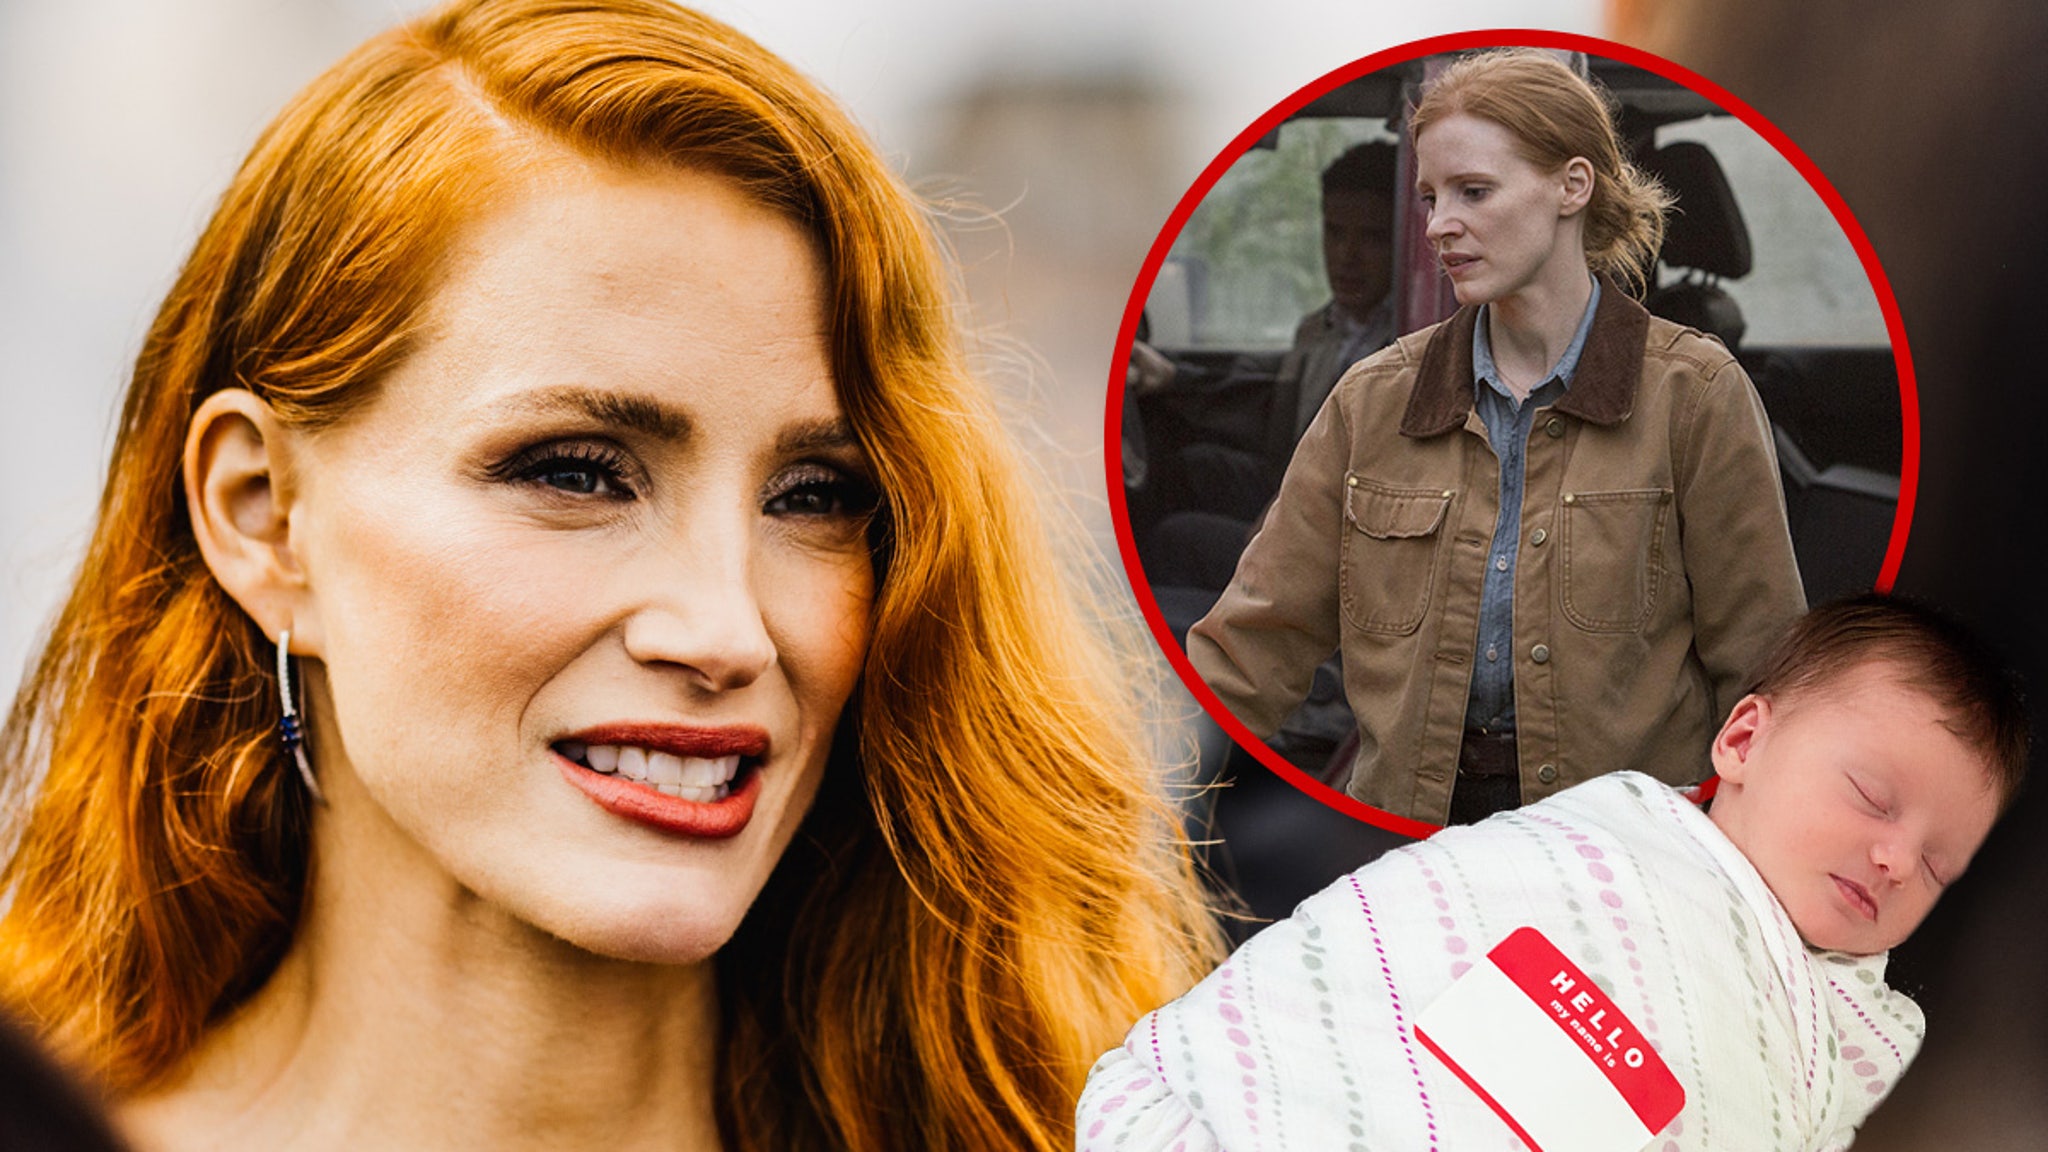 Jessica Chastain's 'Murph' Baby Name Boom Not as Common as She Thinks